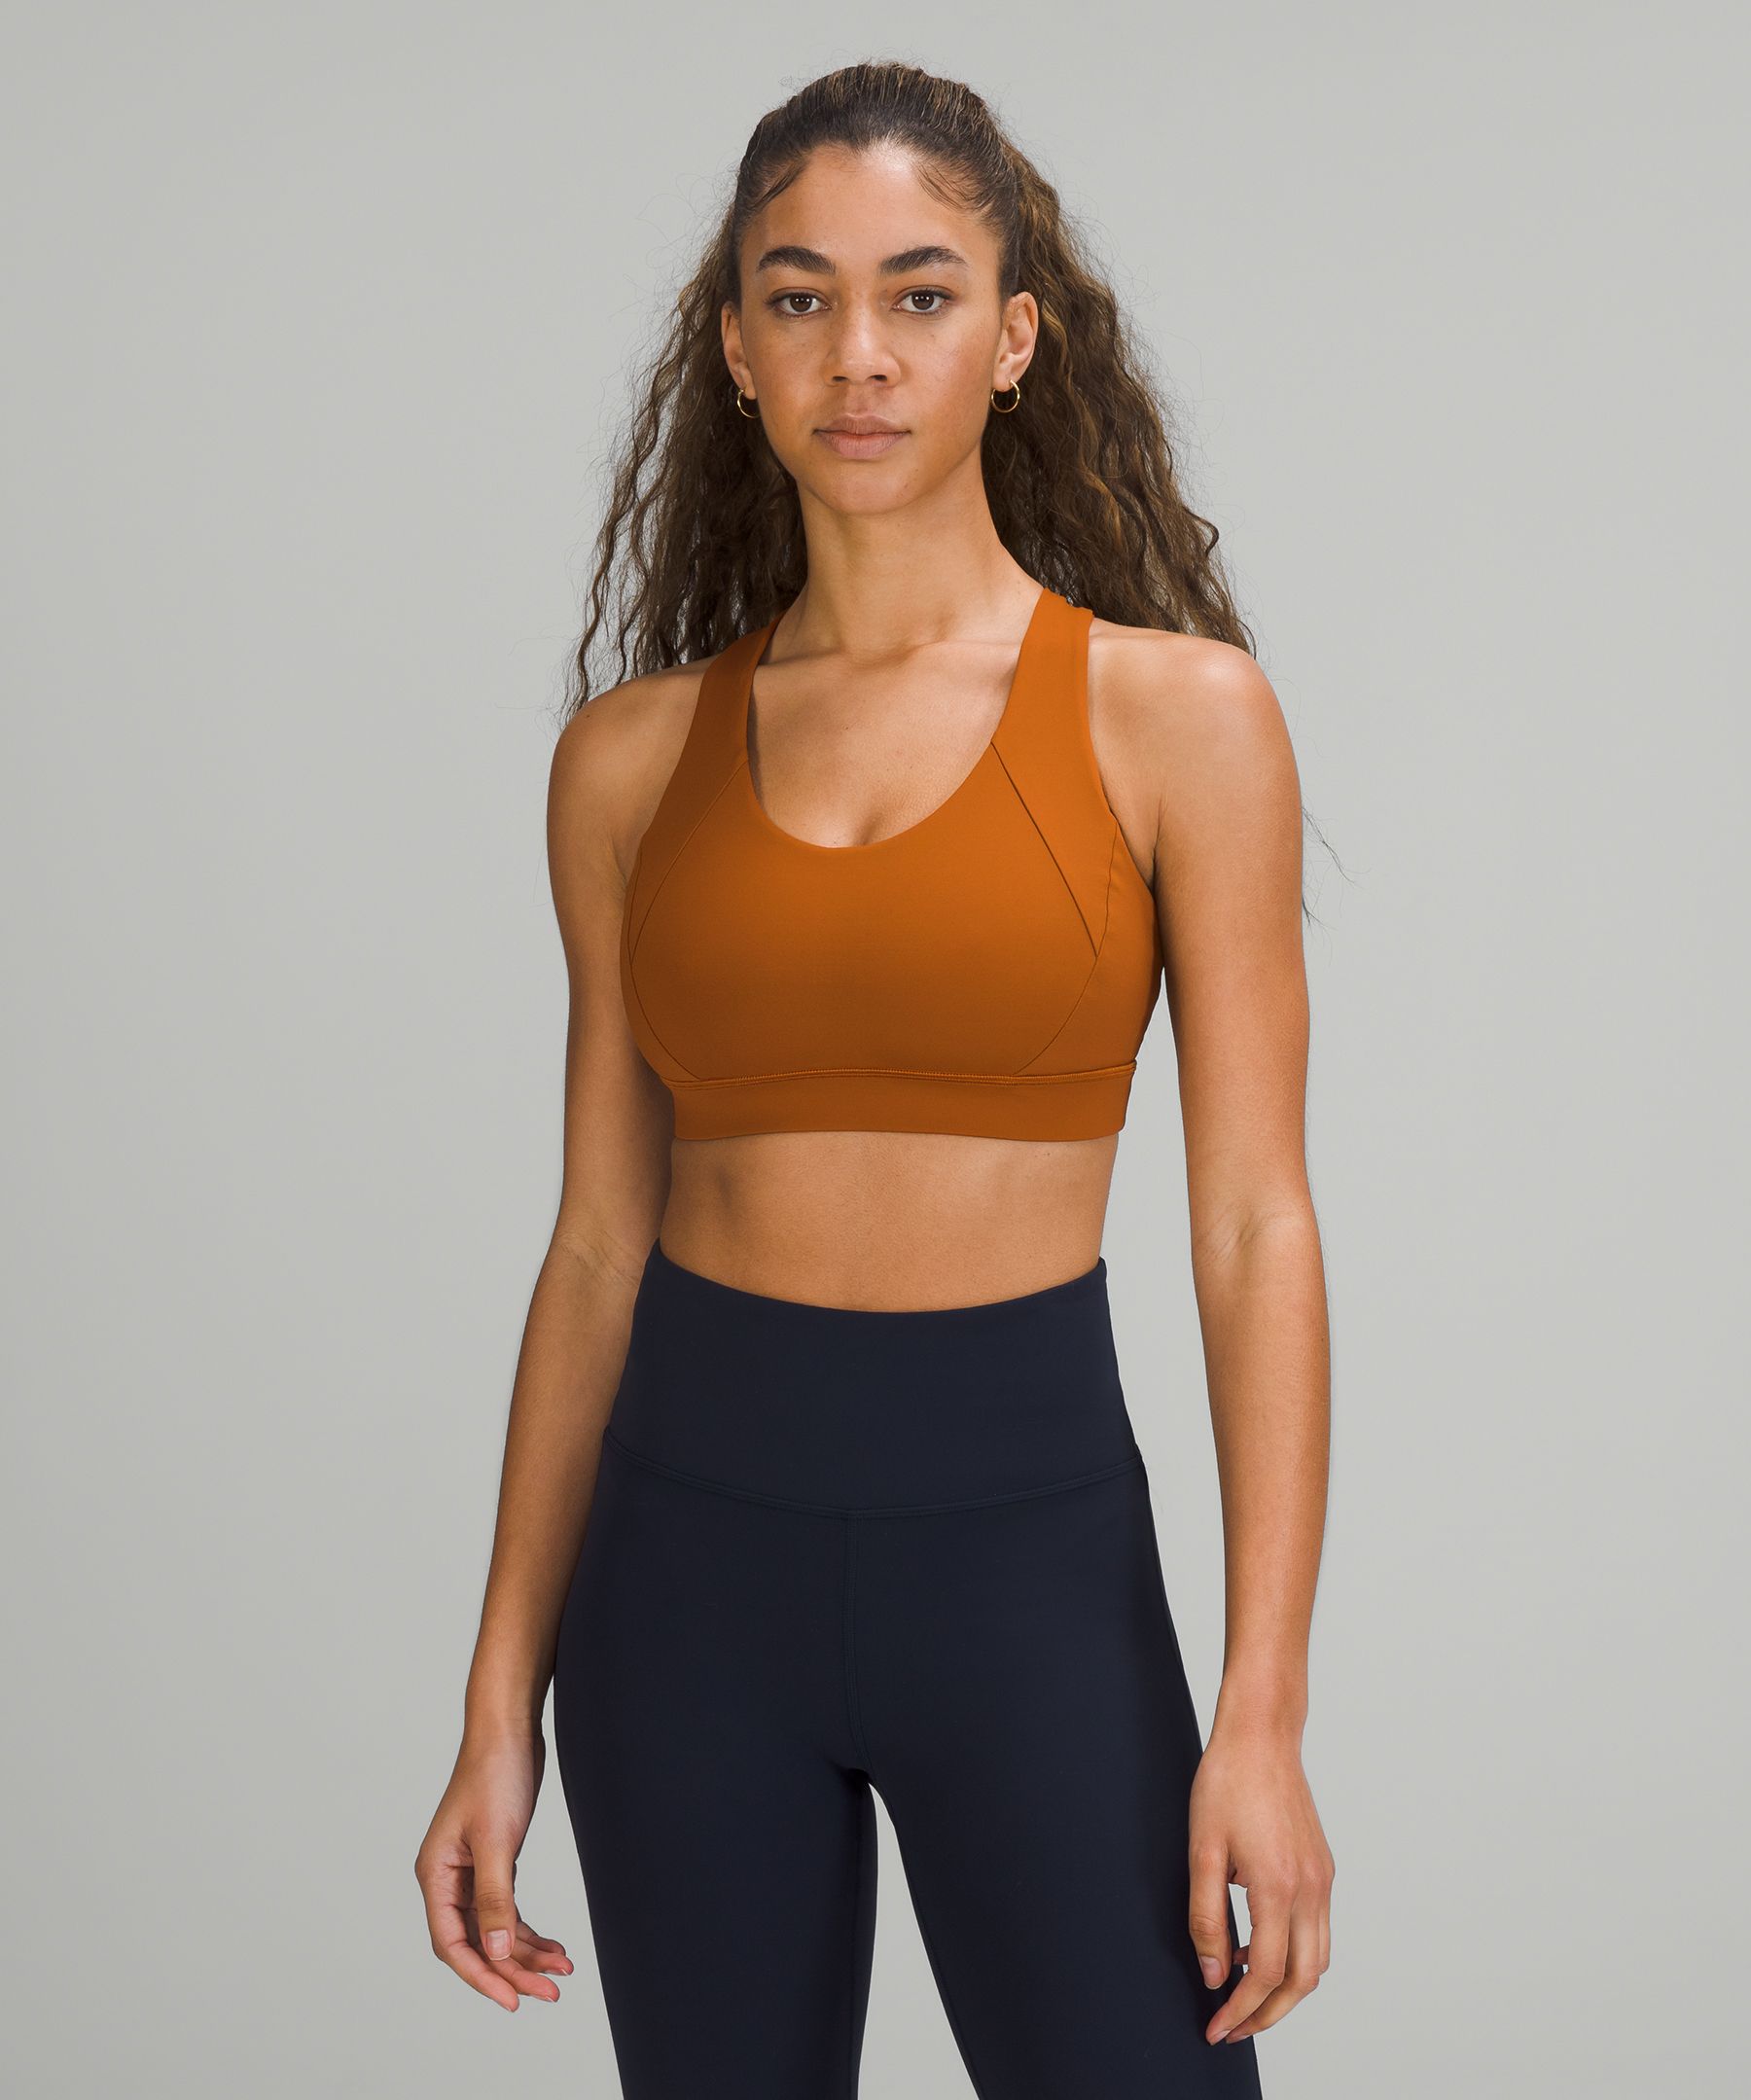 Lululemon Free To Be Elevated Bra Light Support, Dd/ddd(e) Cup In Butternut Brown